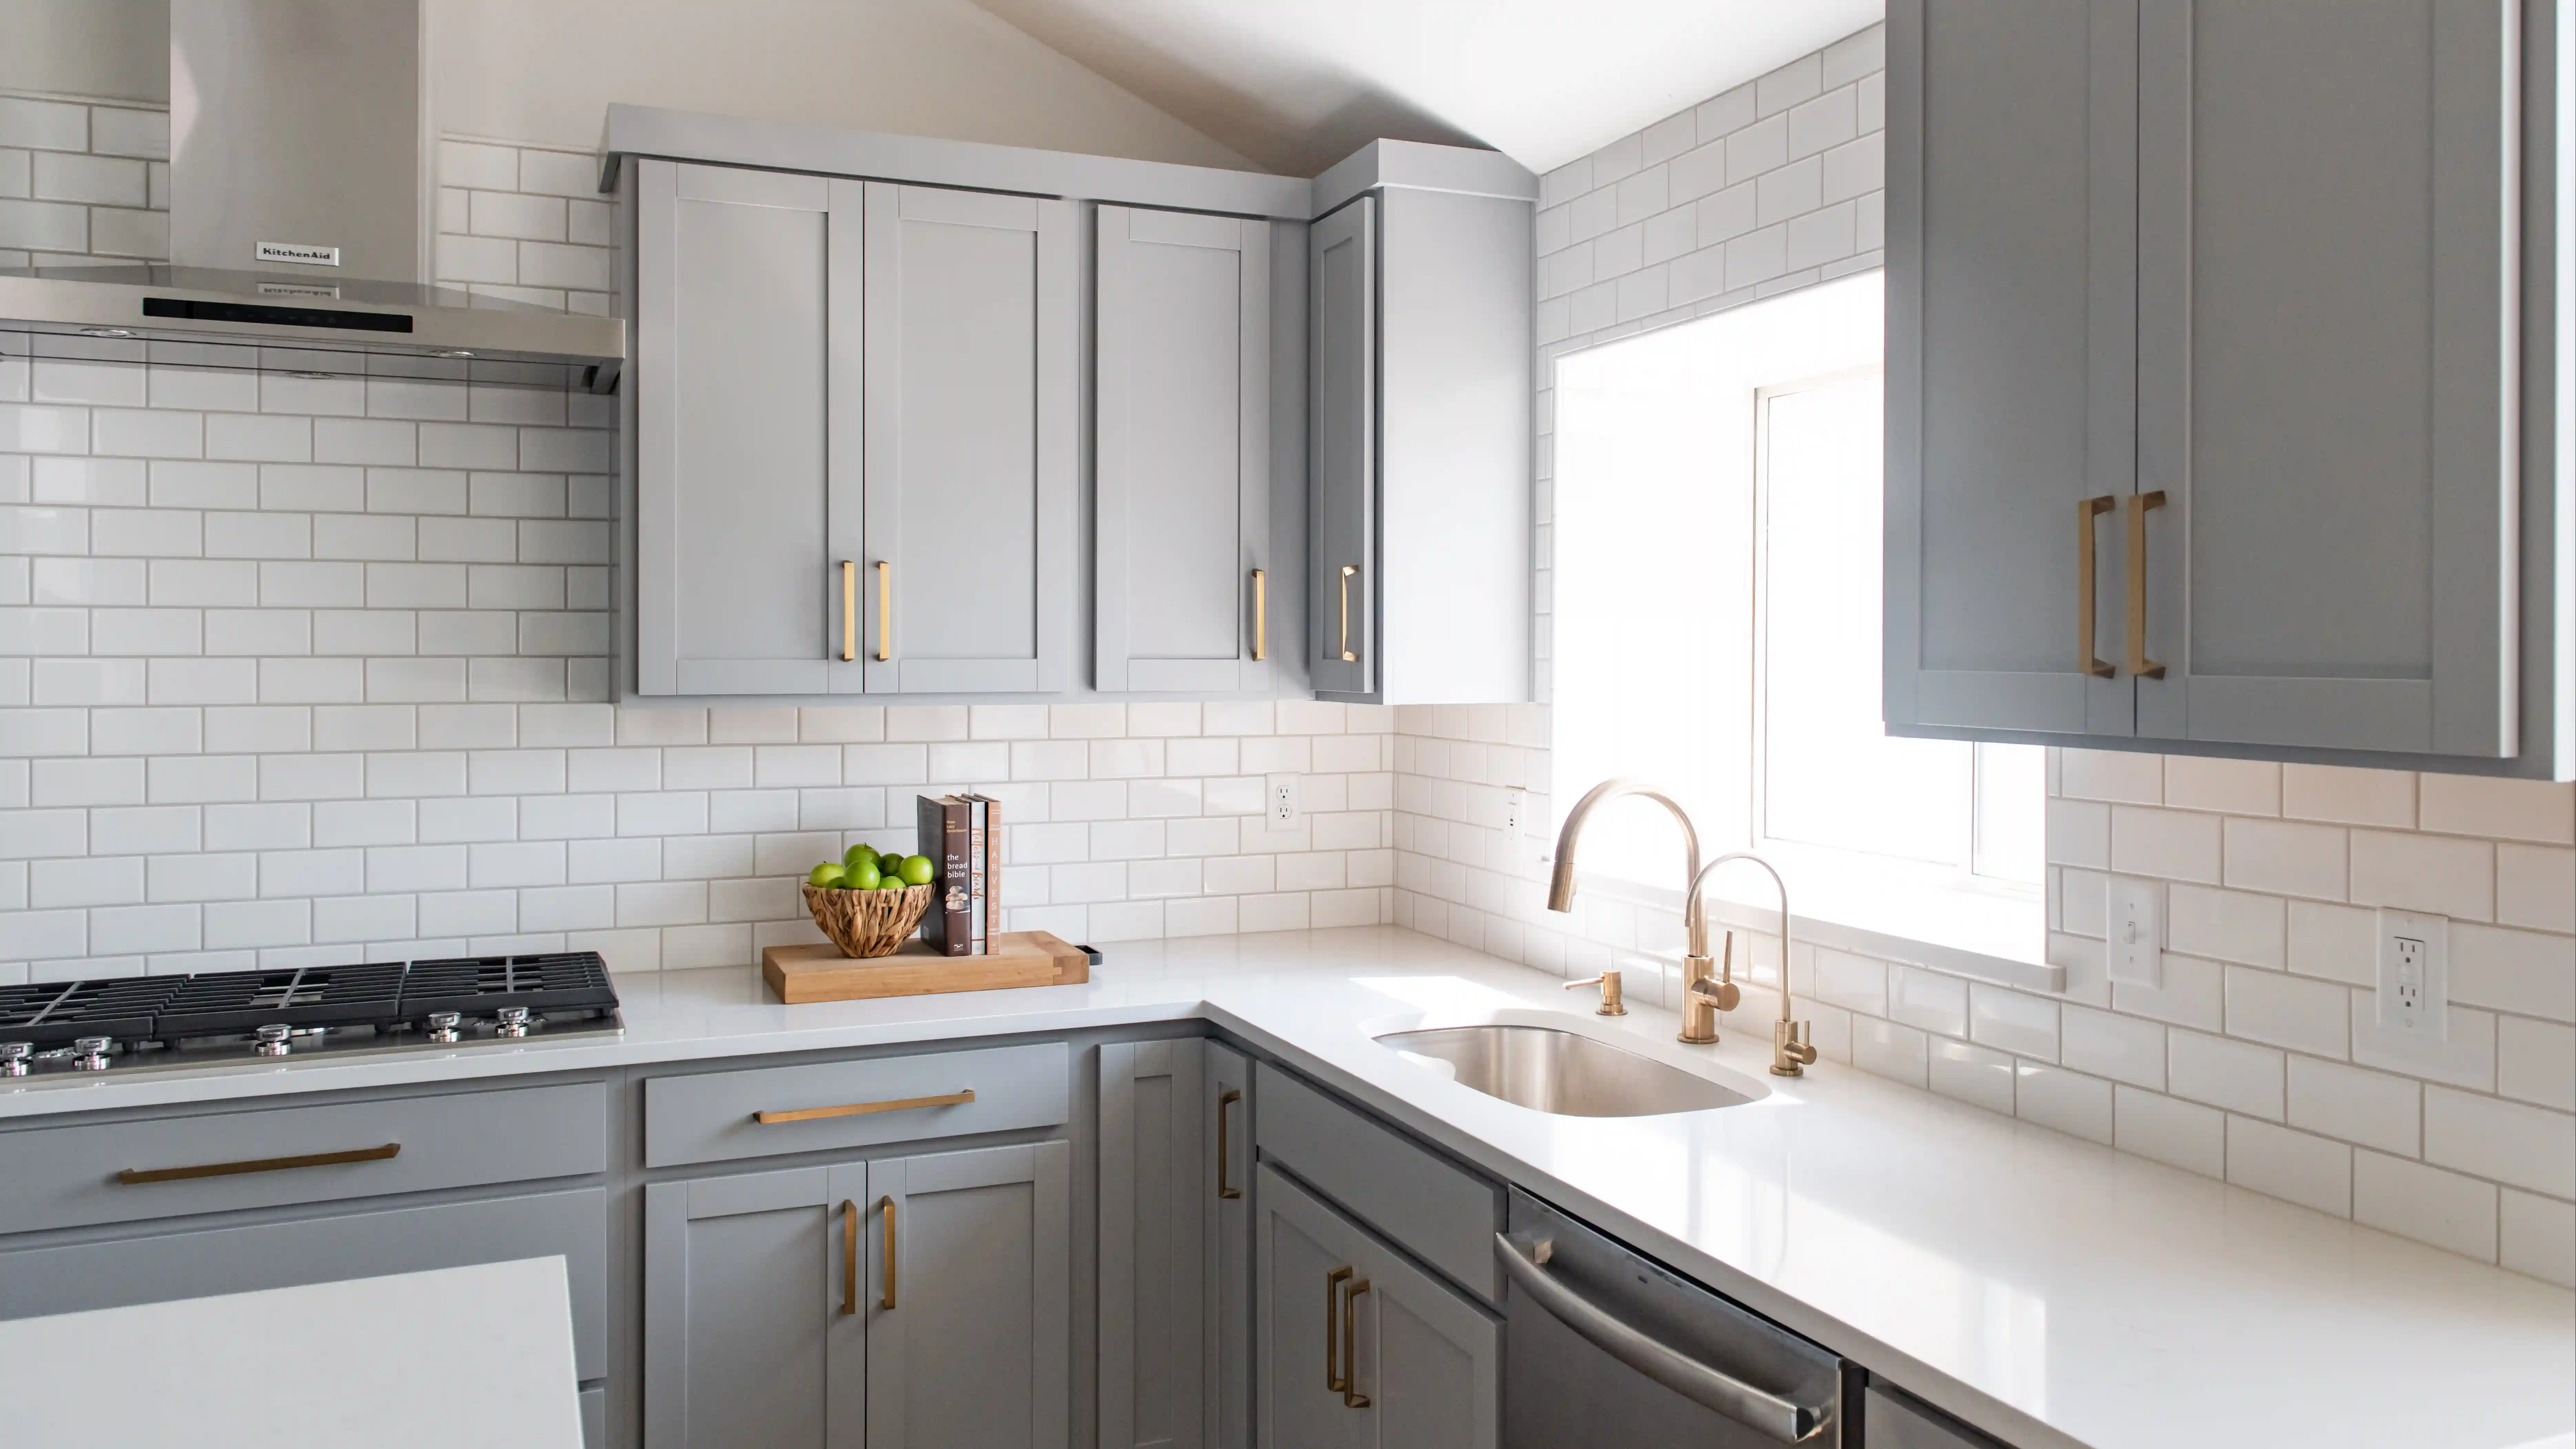 A kitchen with a white subway tile backsplash, white quartz countertops, and medium grey cabinetry with brass pulls. 